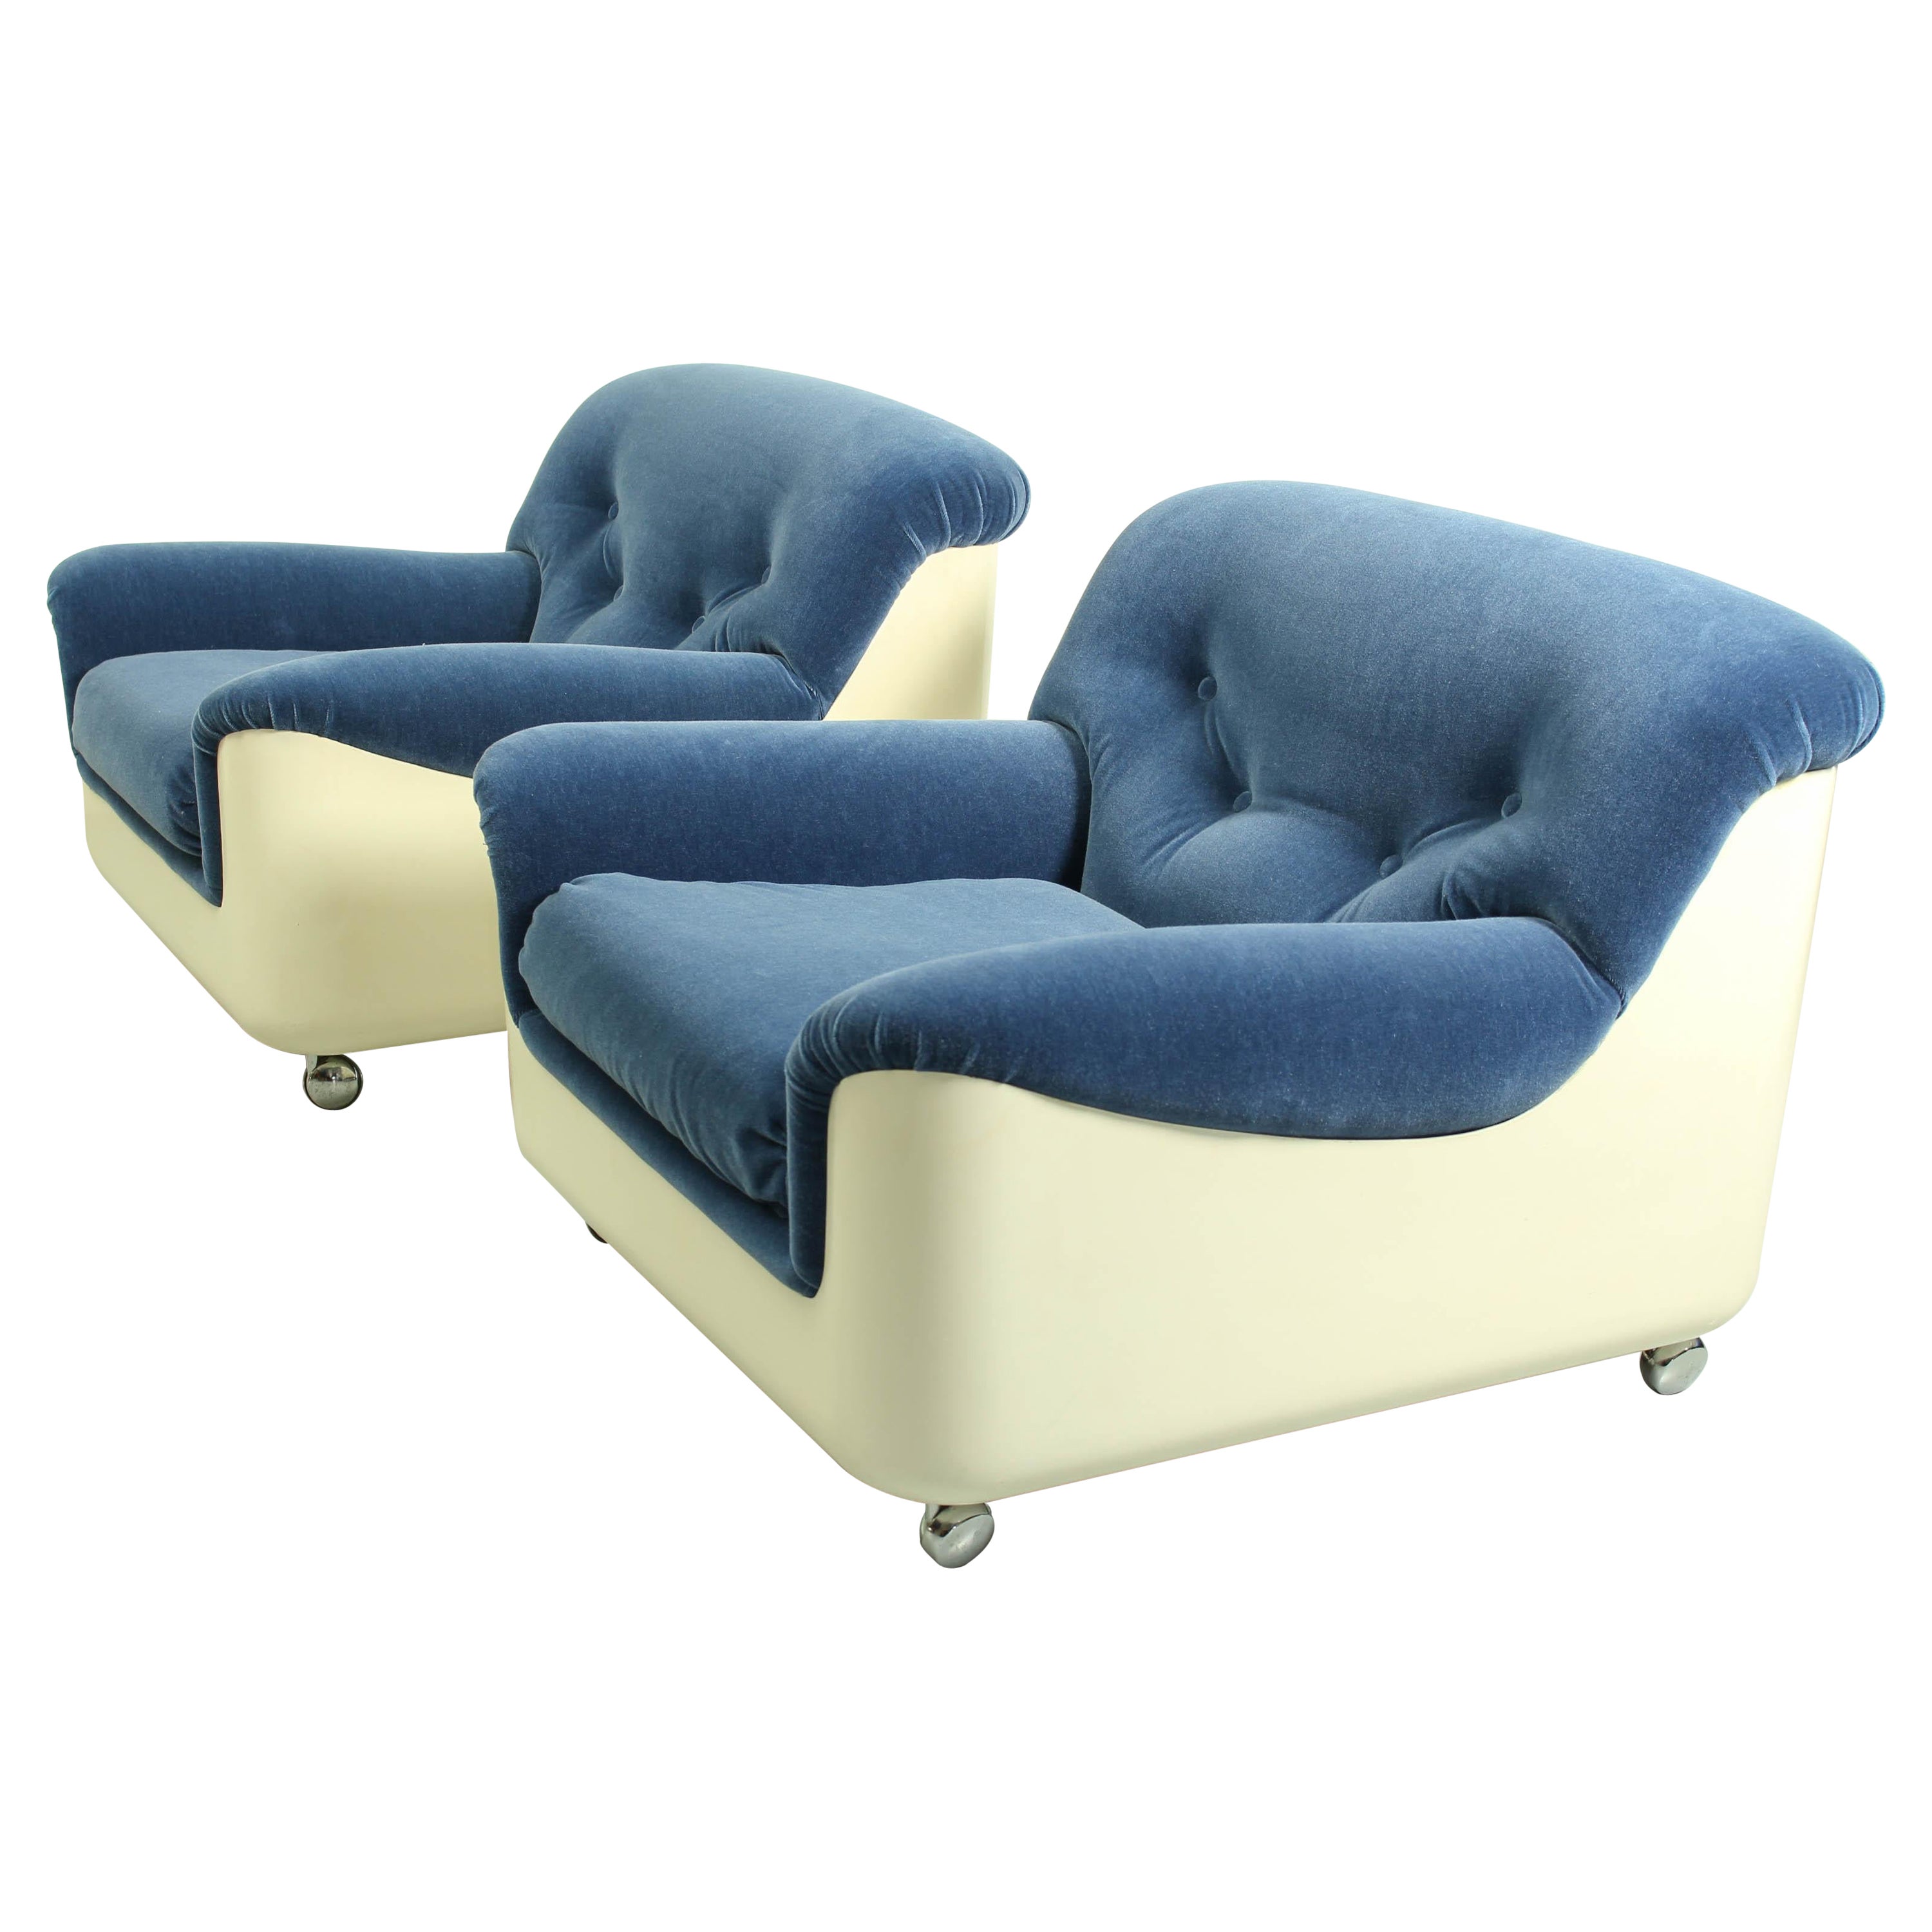 Set of 2 Space Age Fiberglass Lounge Chairs in Blue Mohair, 1970s